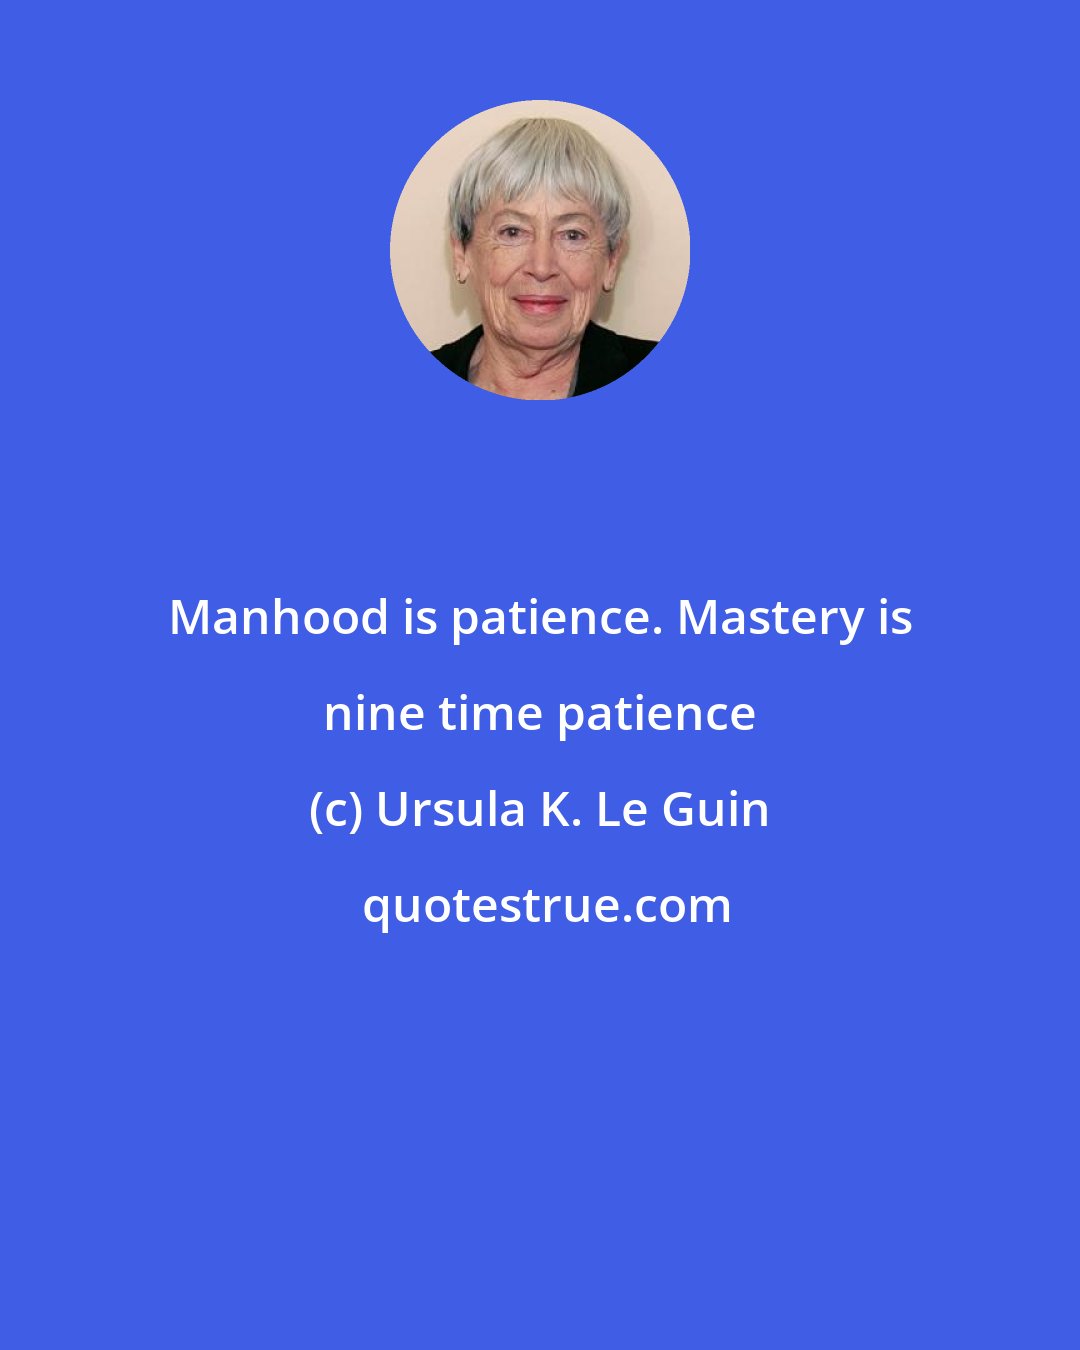 Ursula K. Le Guin: Manhood is patience. Mastery is nine time patience